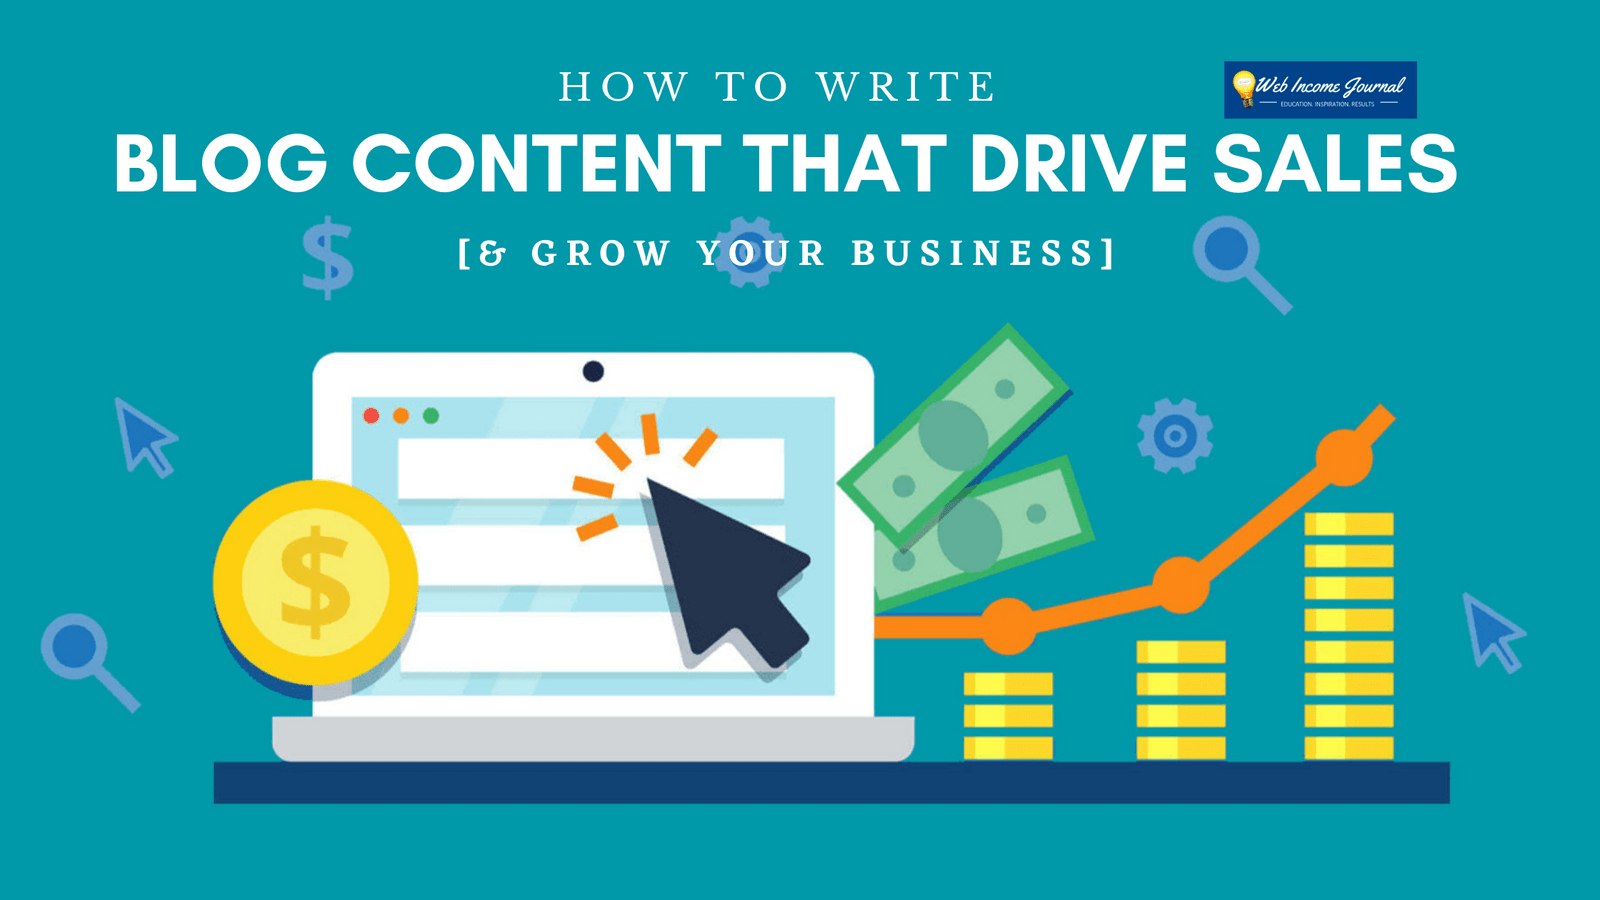 How to Write Blog Content that Drive Sales